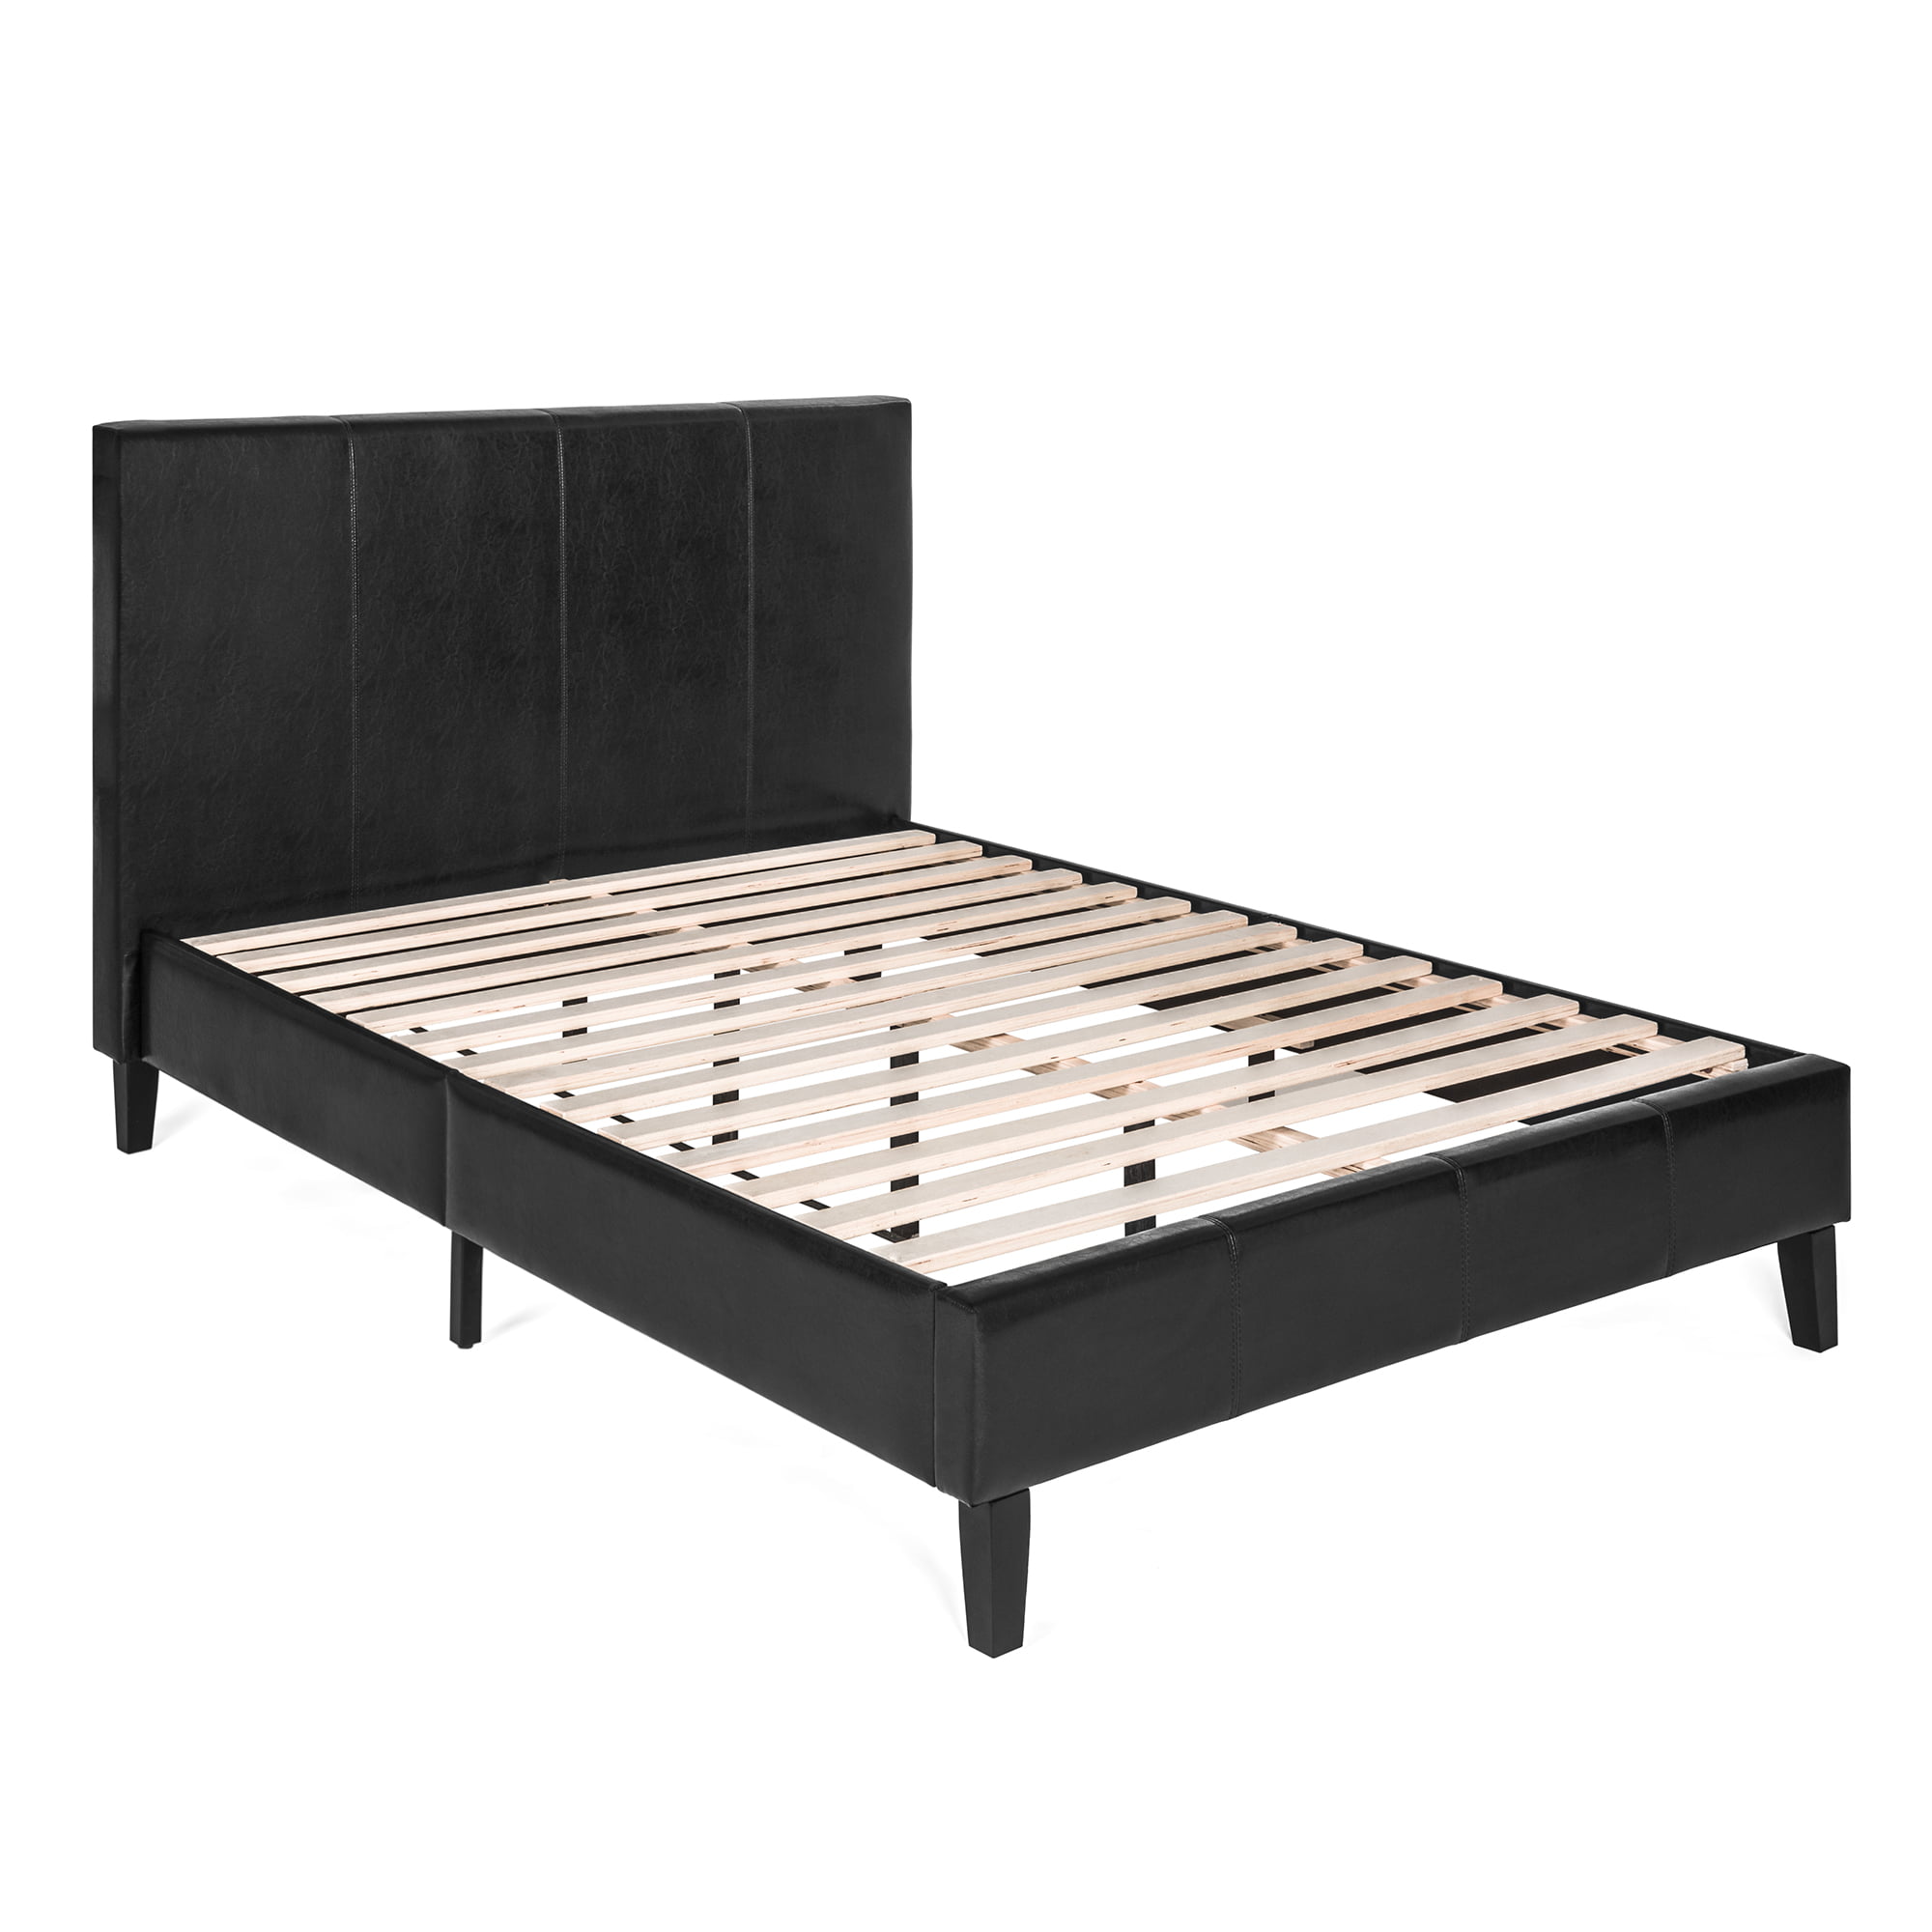 Faux Leather Platform Bed Frame, Leather And Wood Bed Frame Full